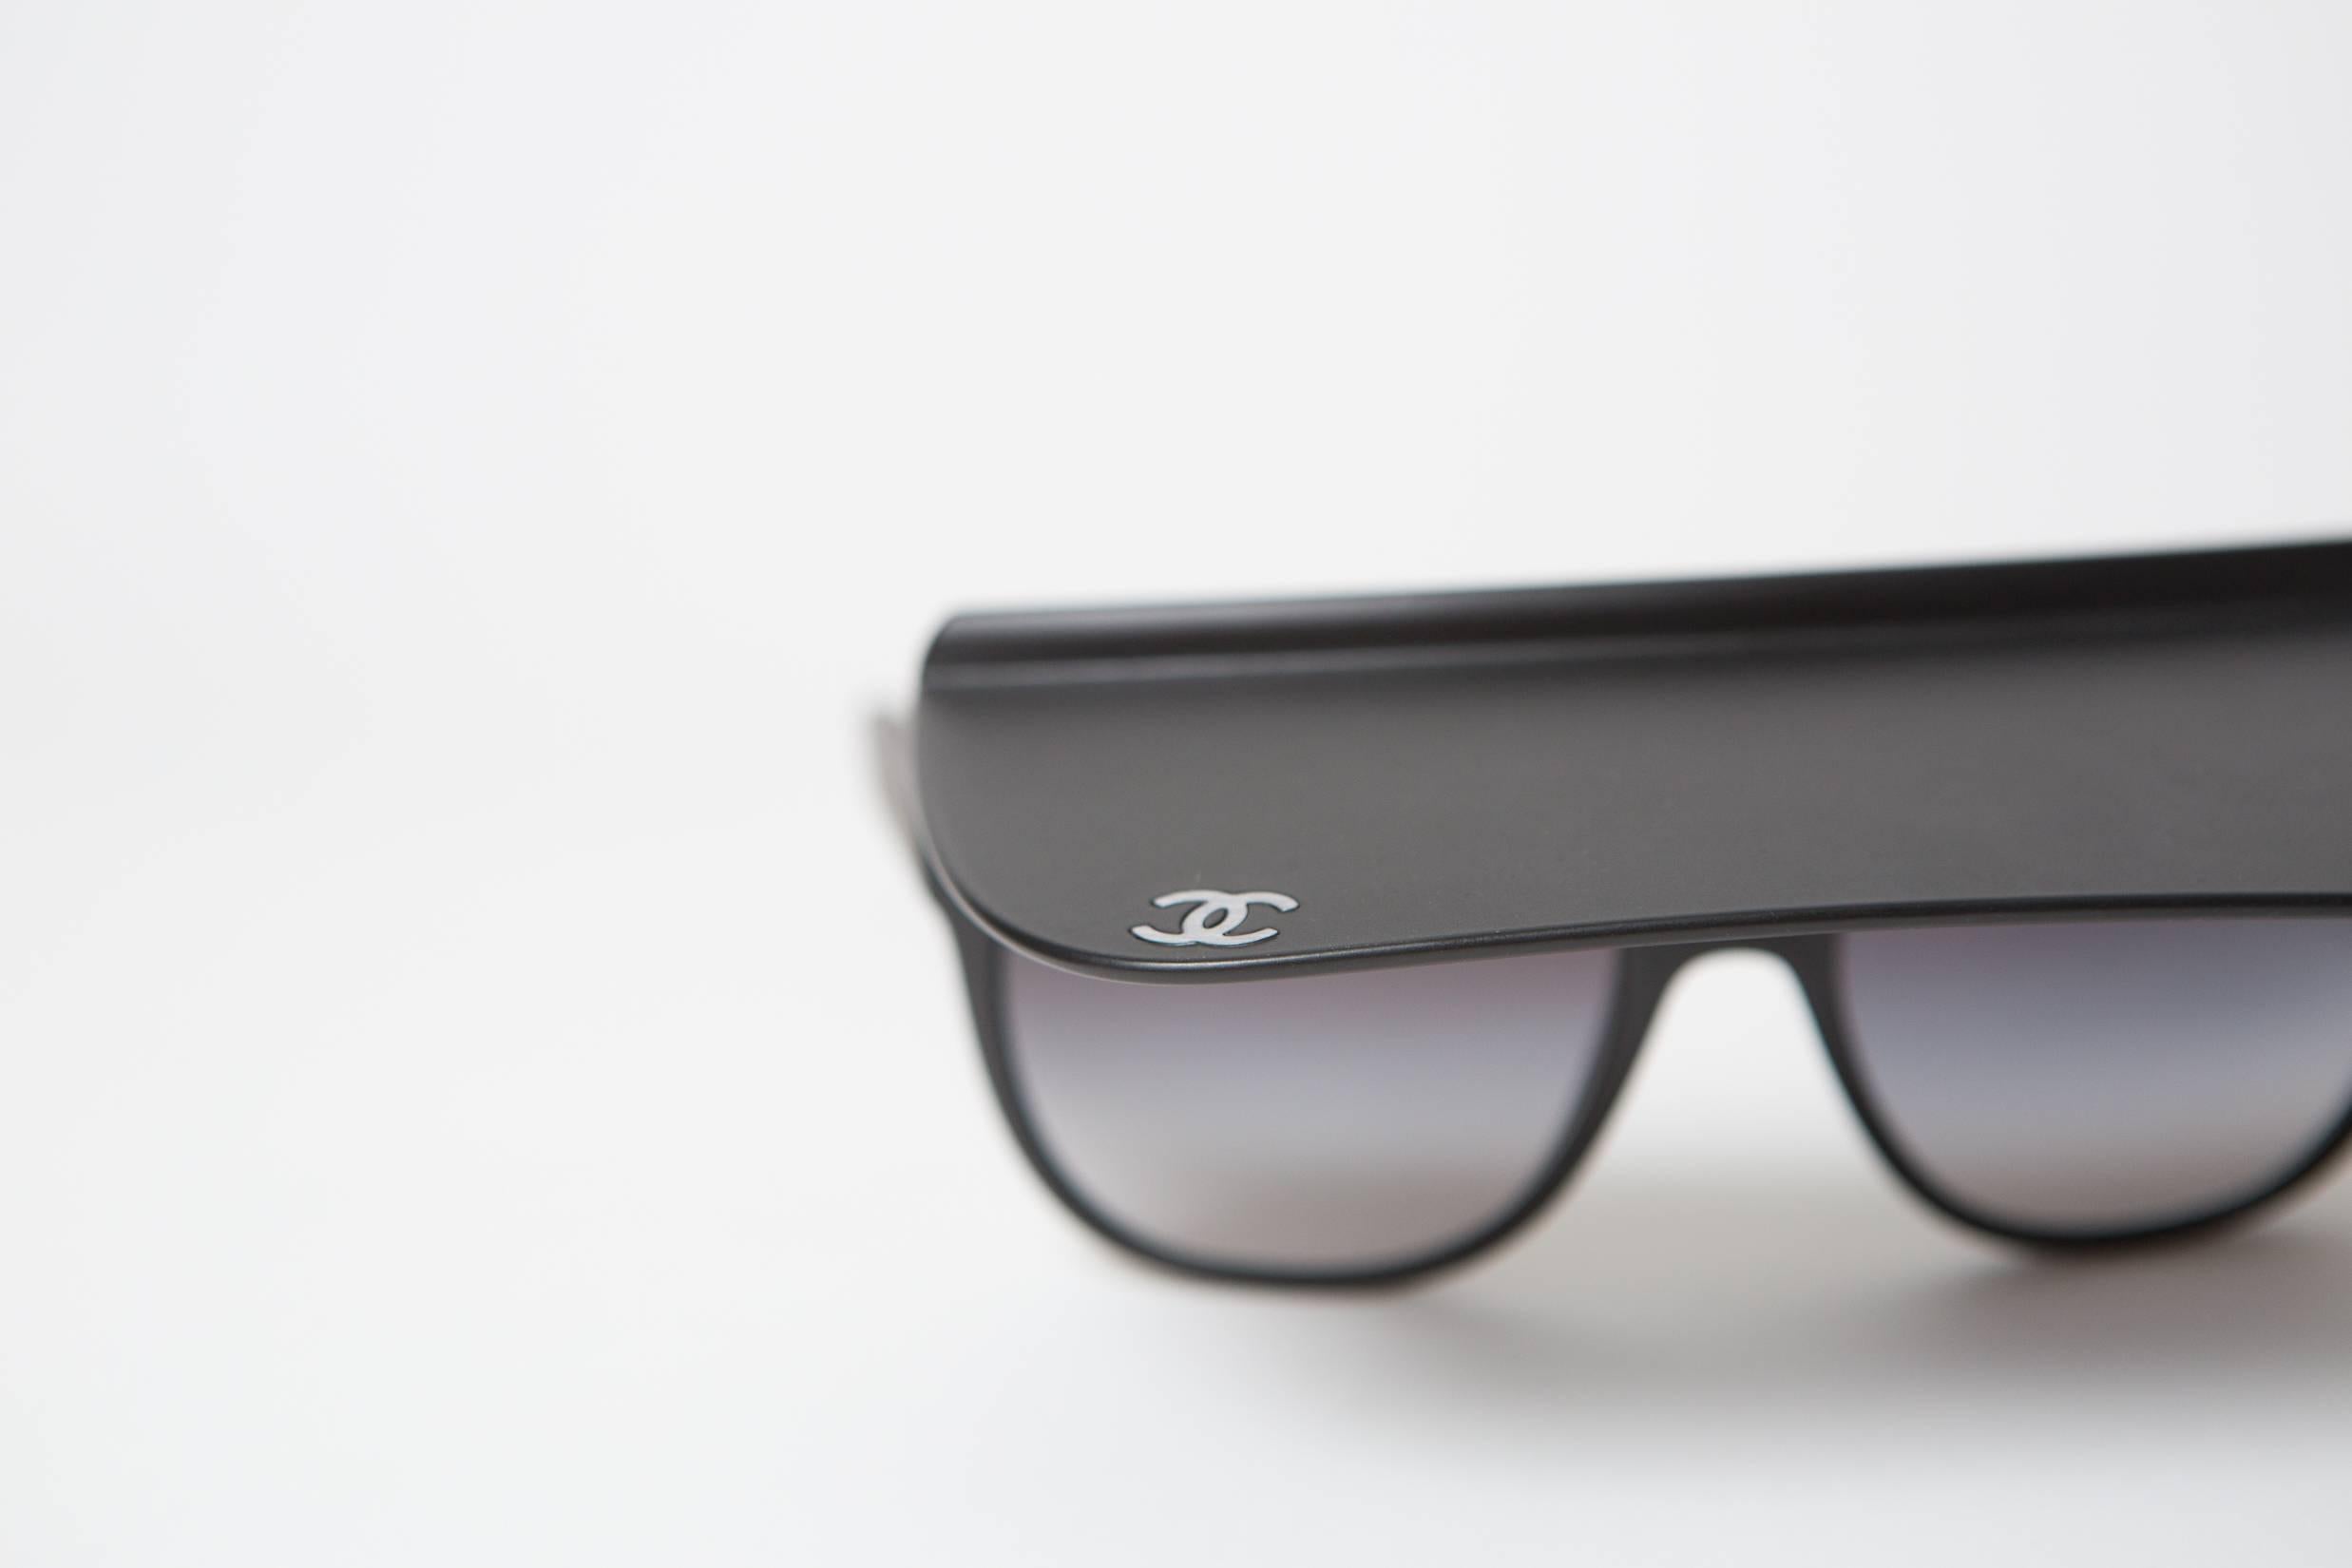 Chanel black sunglasses with visor from Spring/Summer 2014 runway.